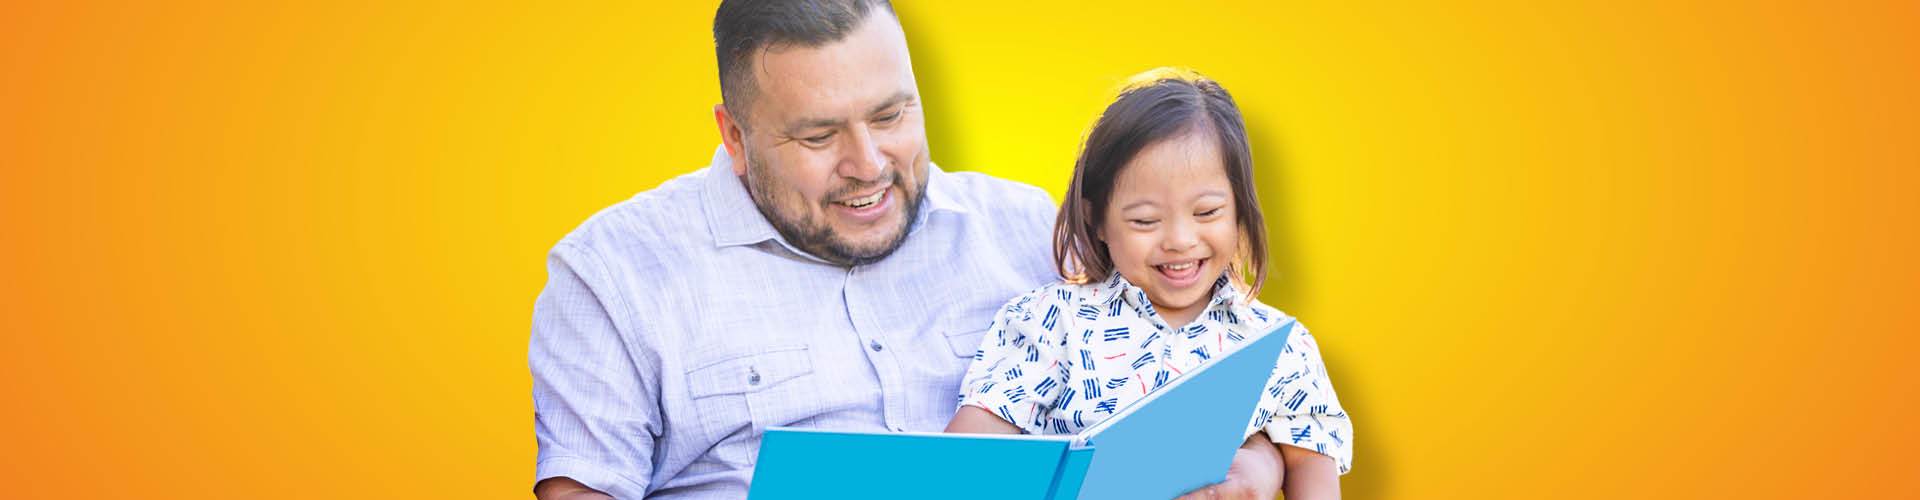 dad reading to kid